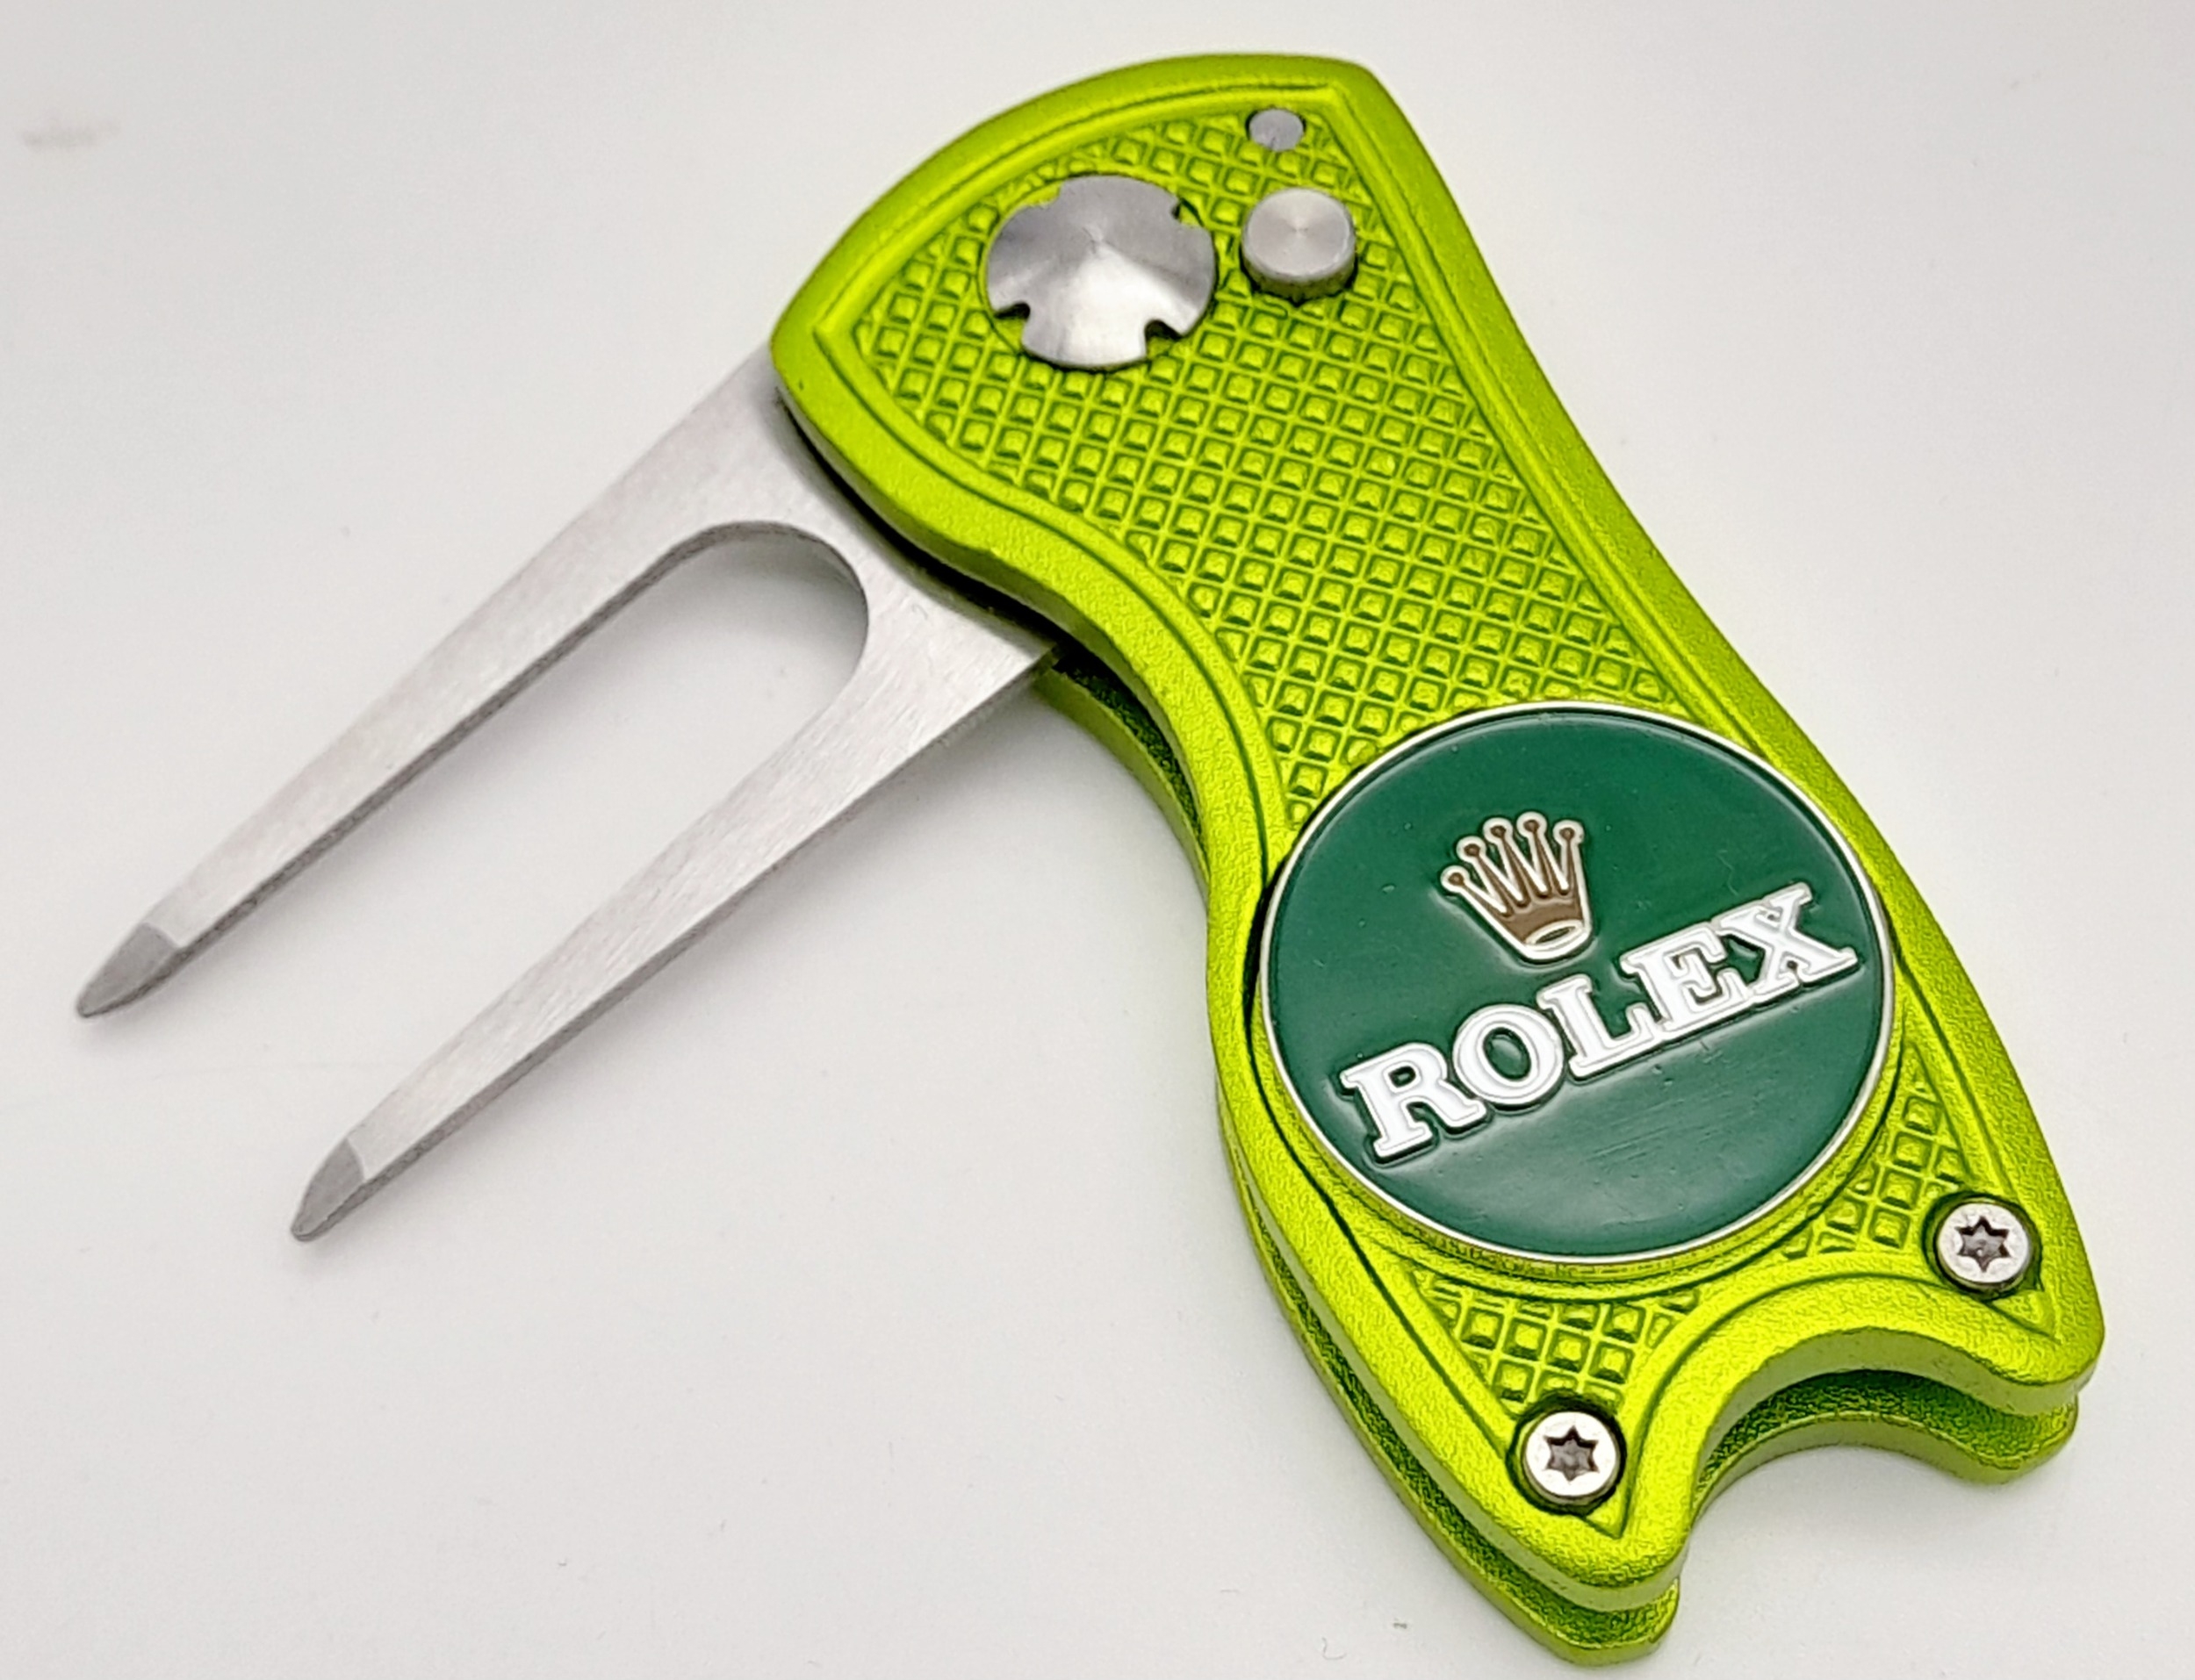 A Rolex Branded Retractable 'Flick' Golf Putting Divot Repair Tool. Removable magnetic ball marker - - Image 2 of 4